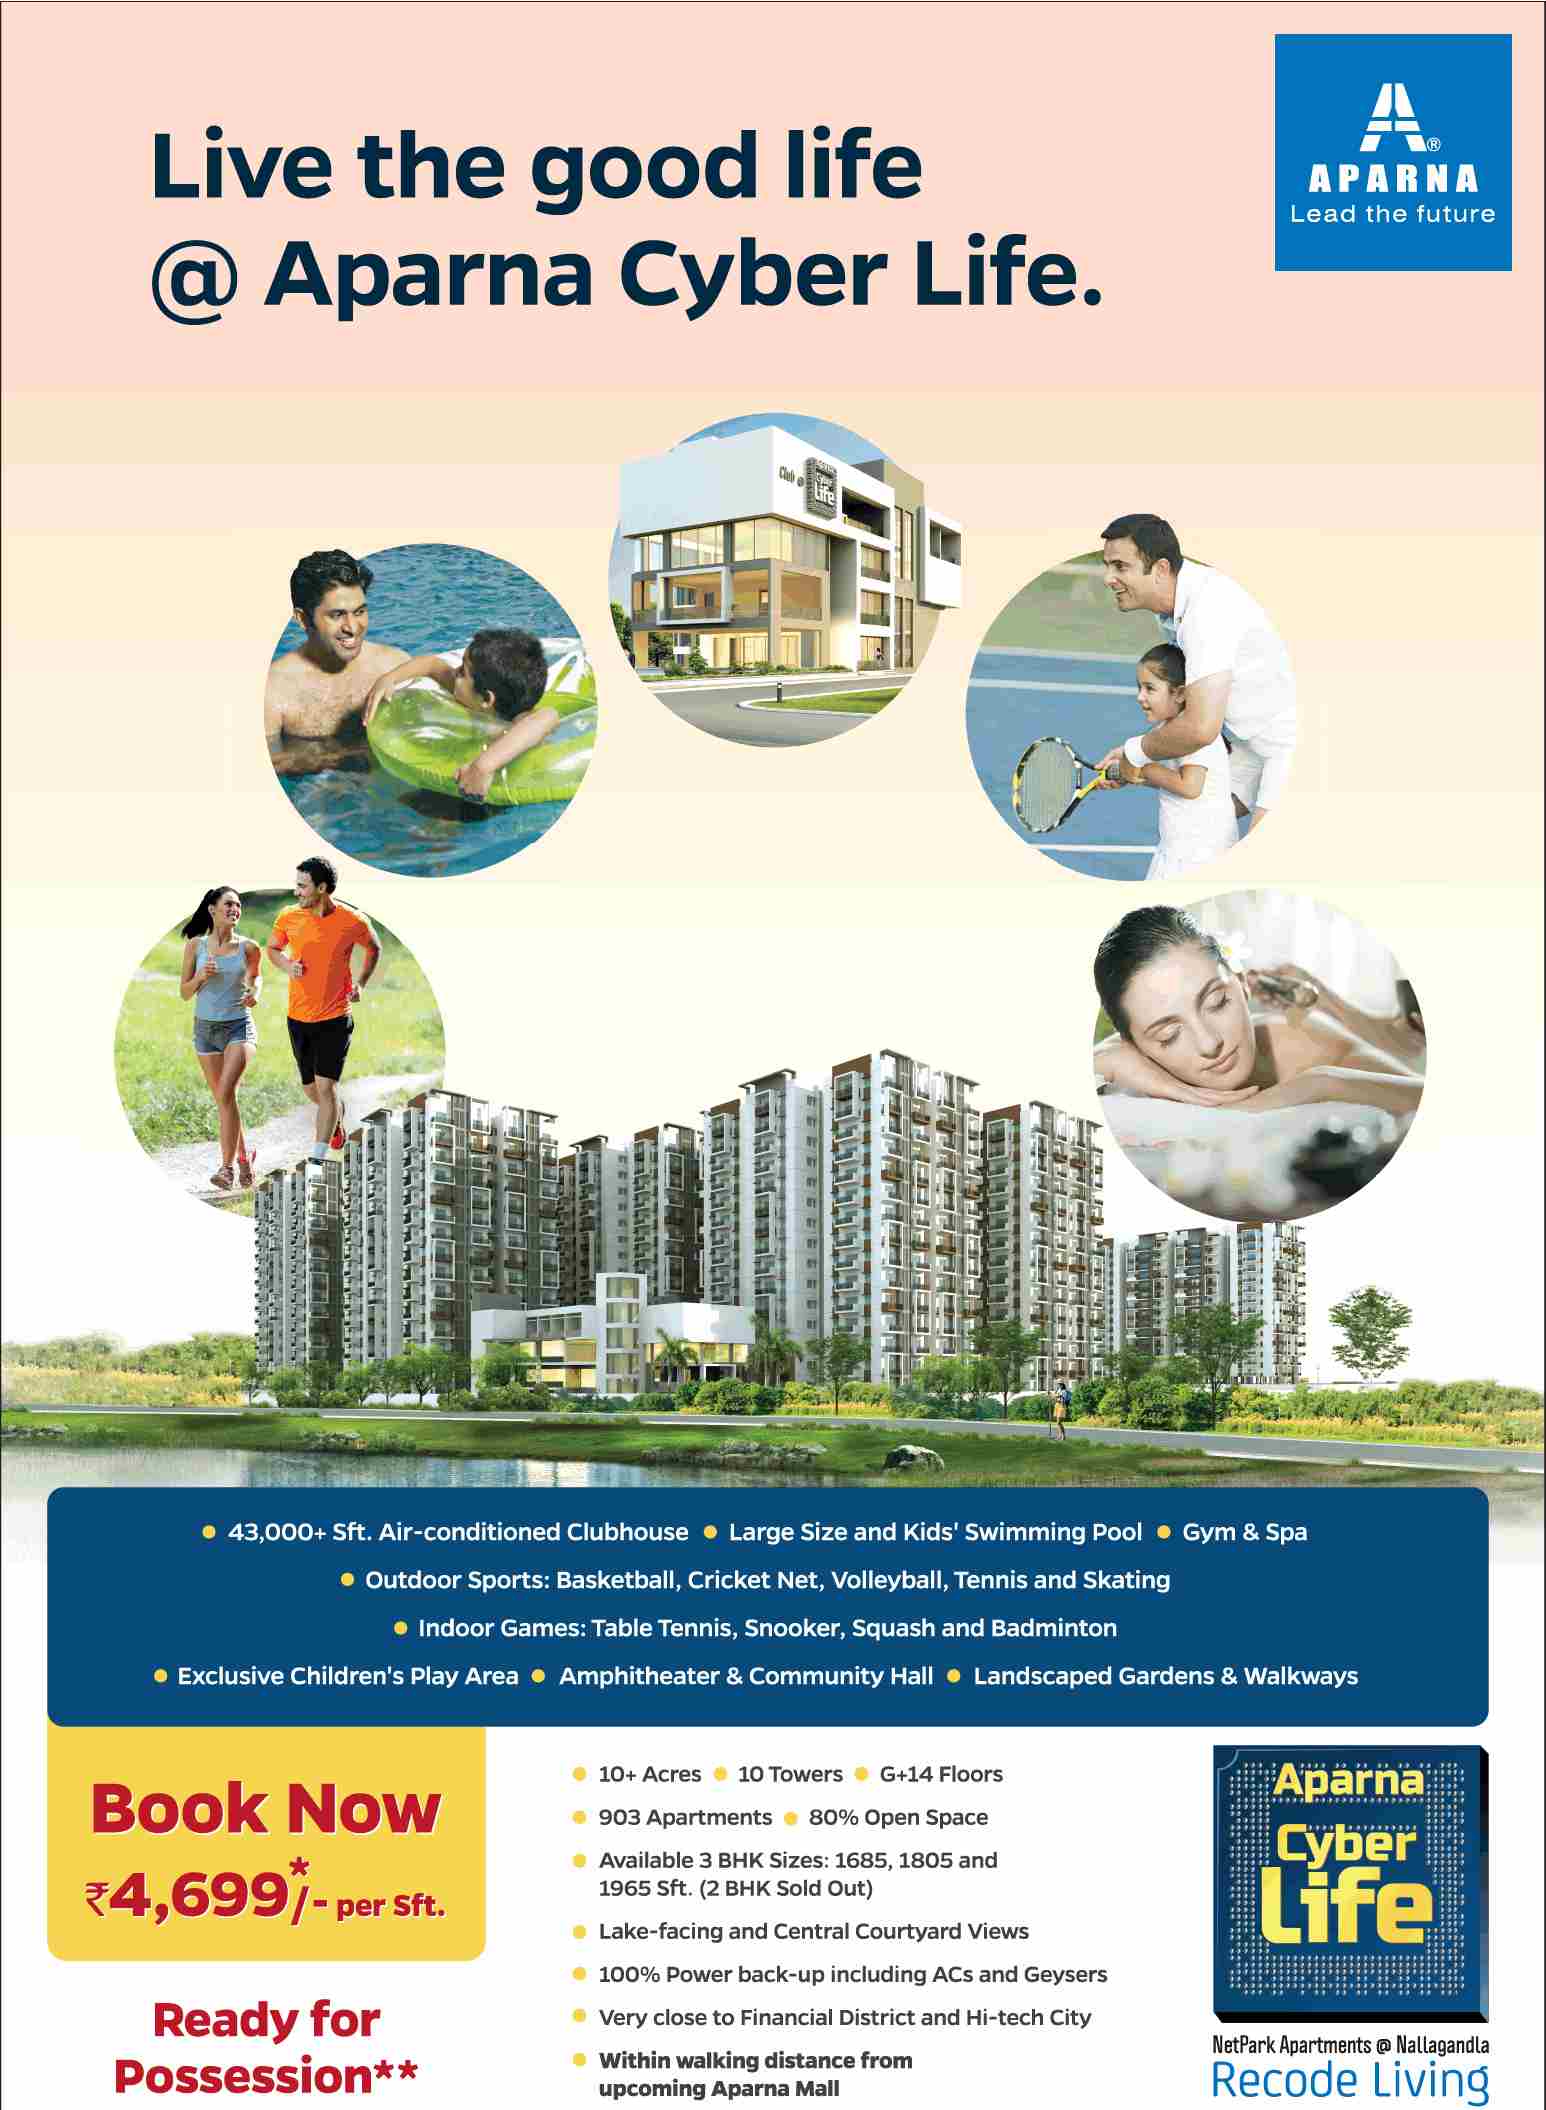 Aparna Cyber Life is now ready for possession in Hyderabad Update